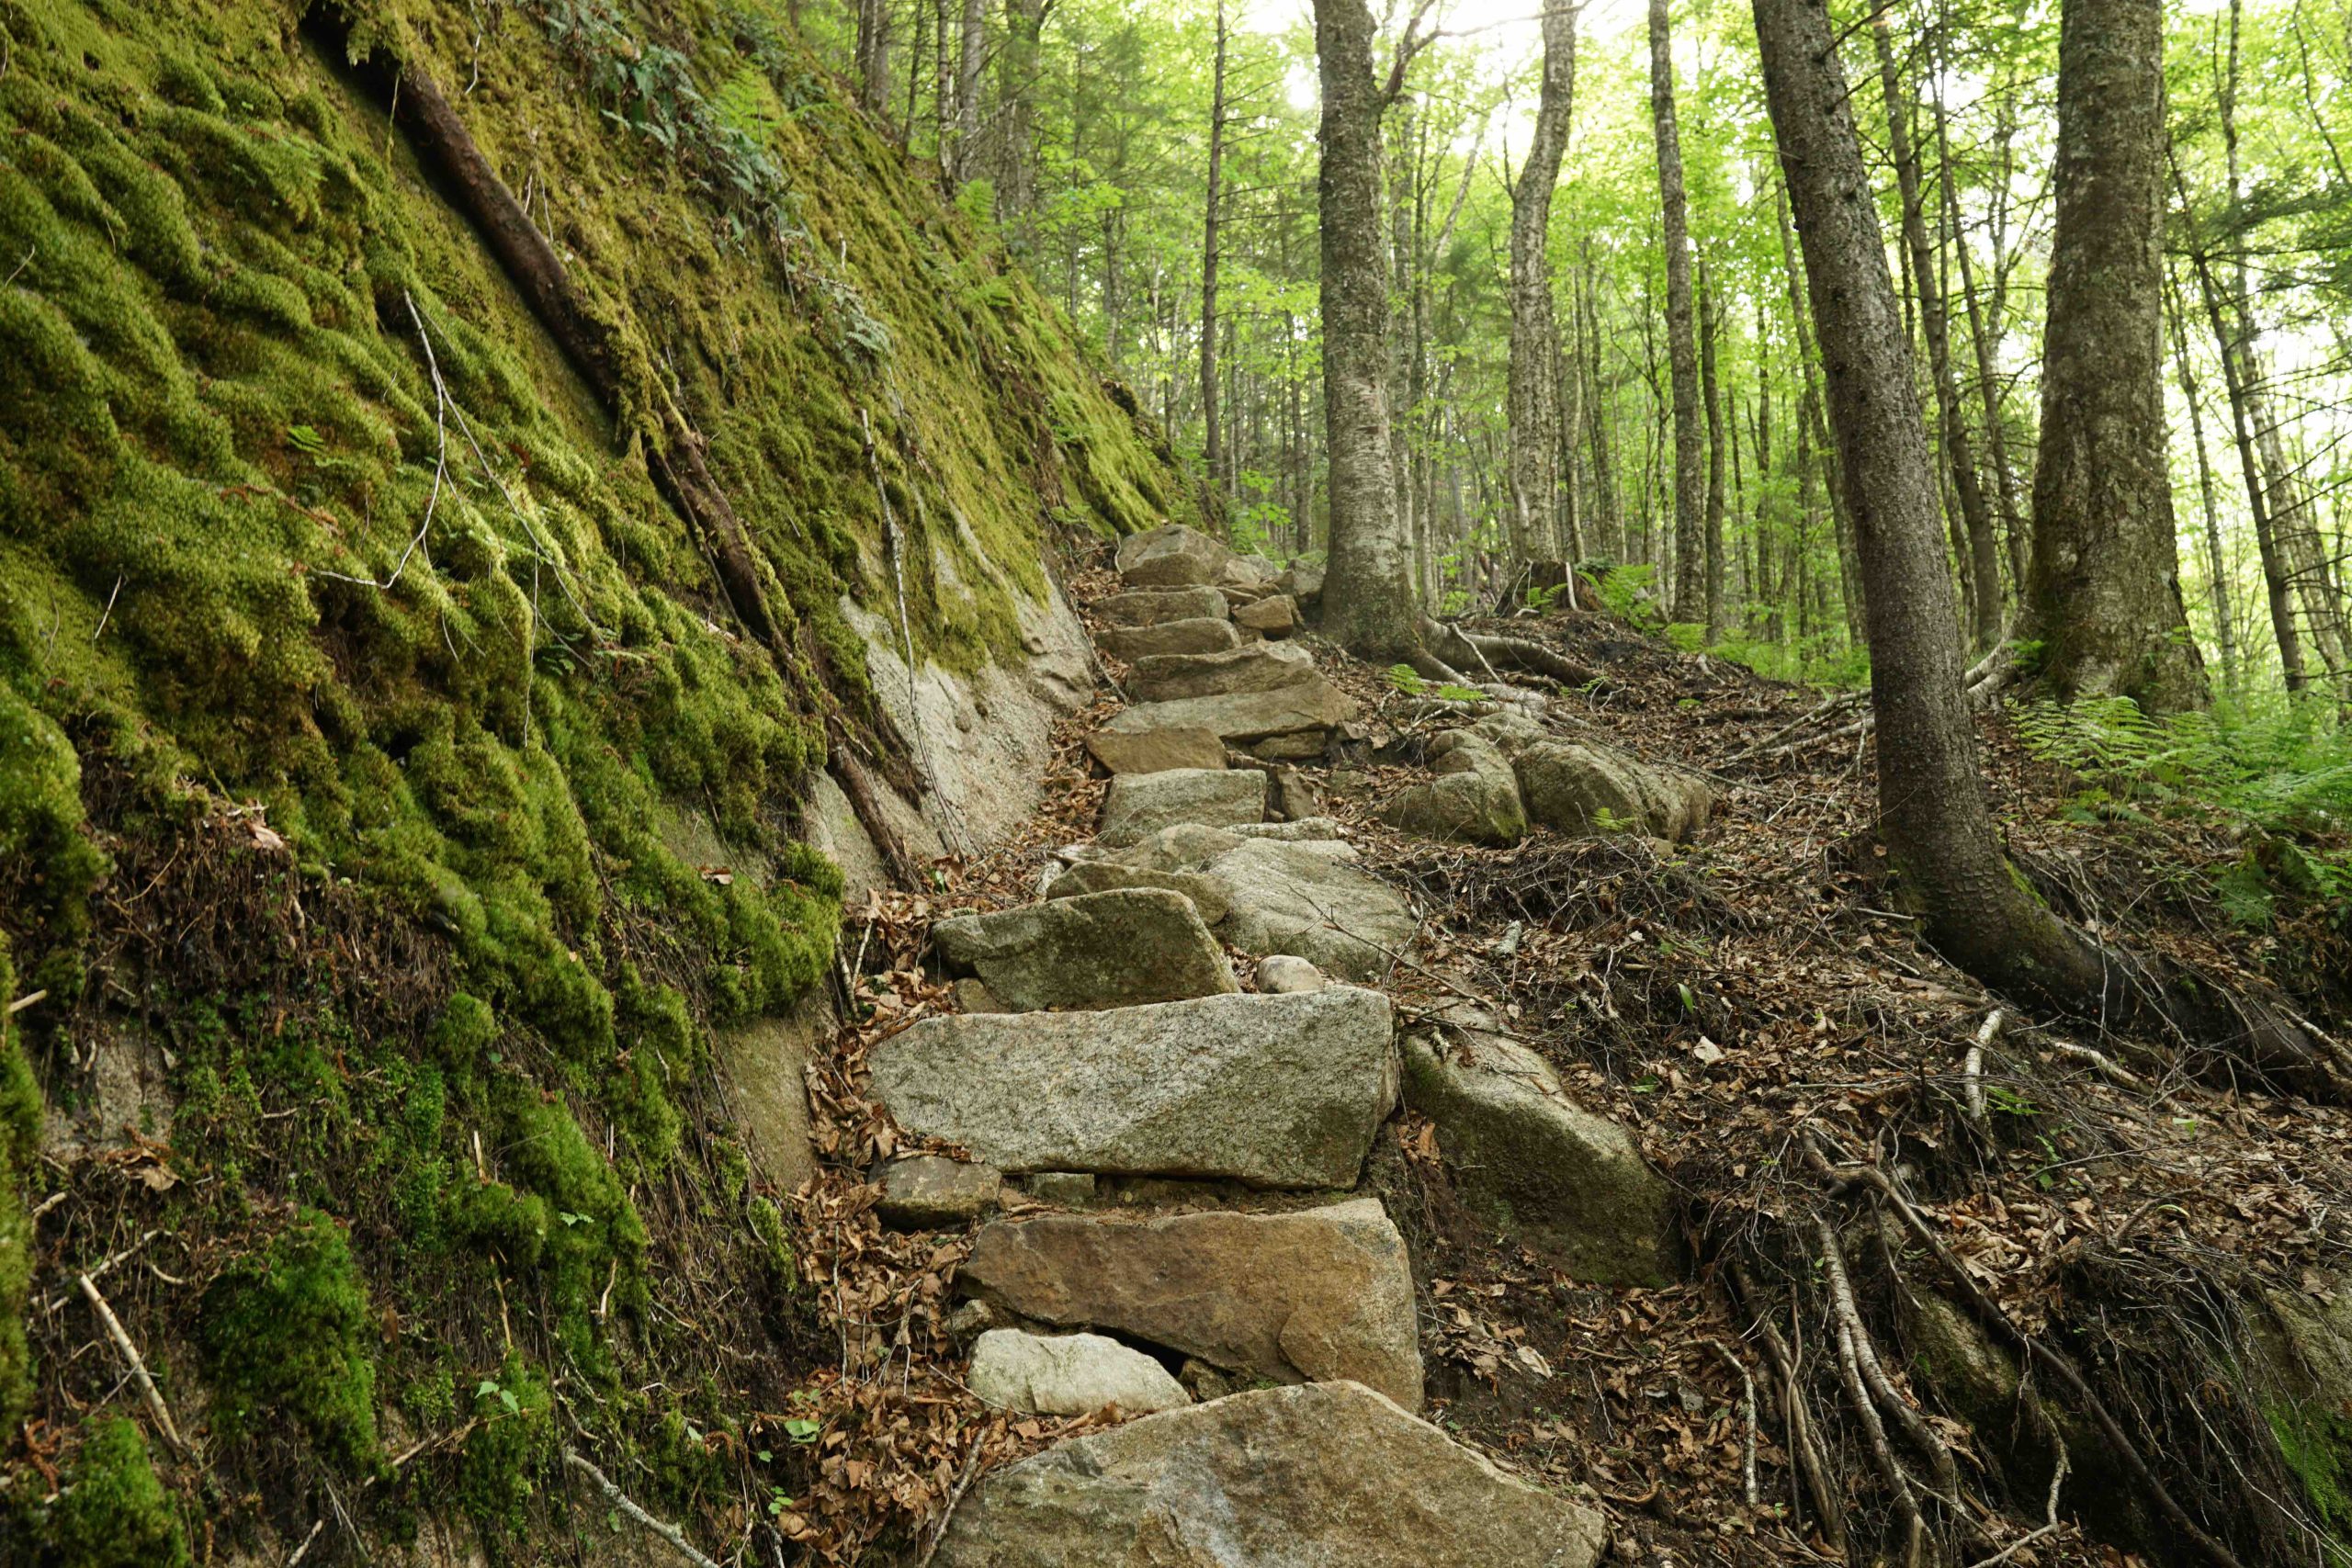 The Pas-de-Géant staircase, accessible via the Valley trails, with its large rocks creating a staircase in the middle of nature, and surrounded by lush vegetation.